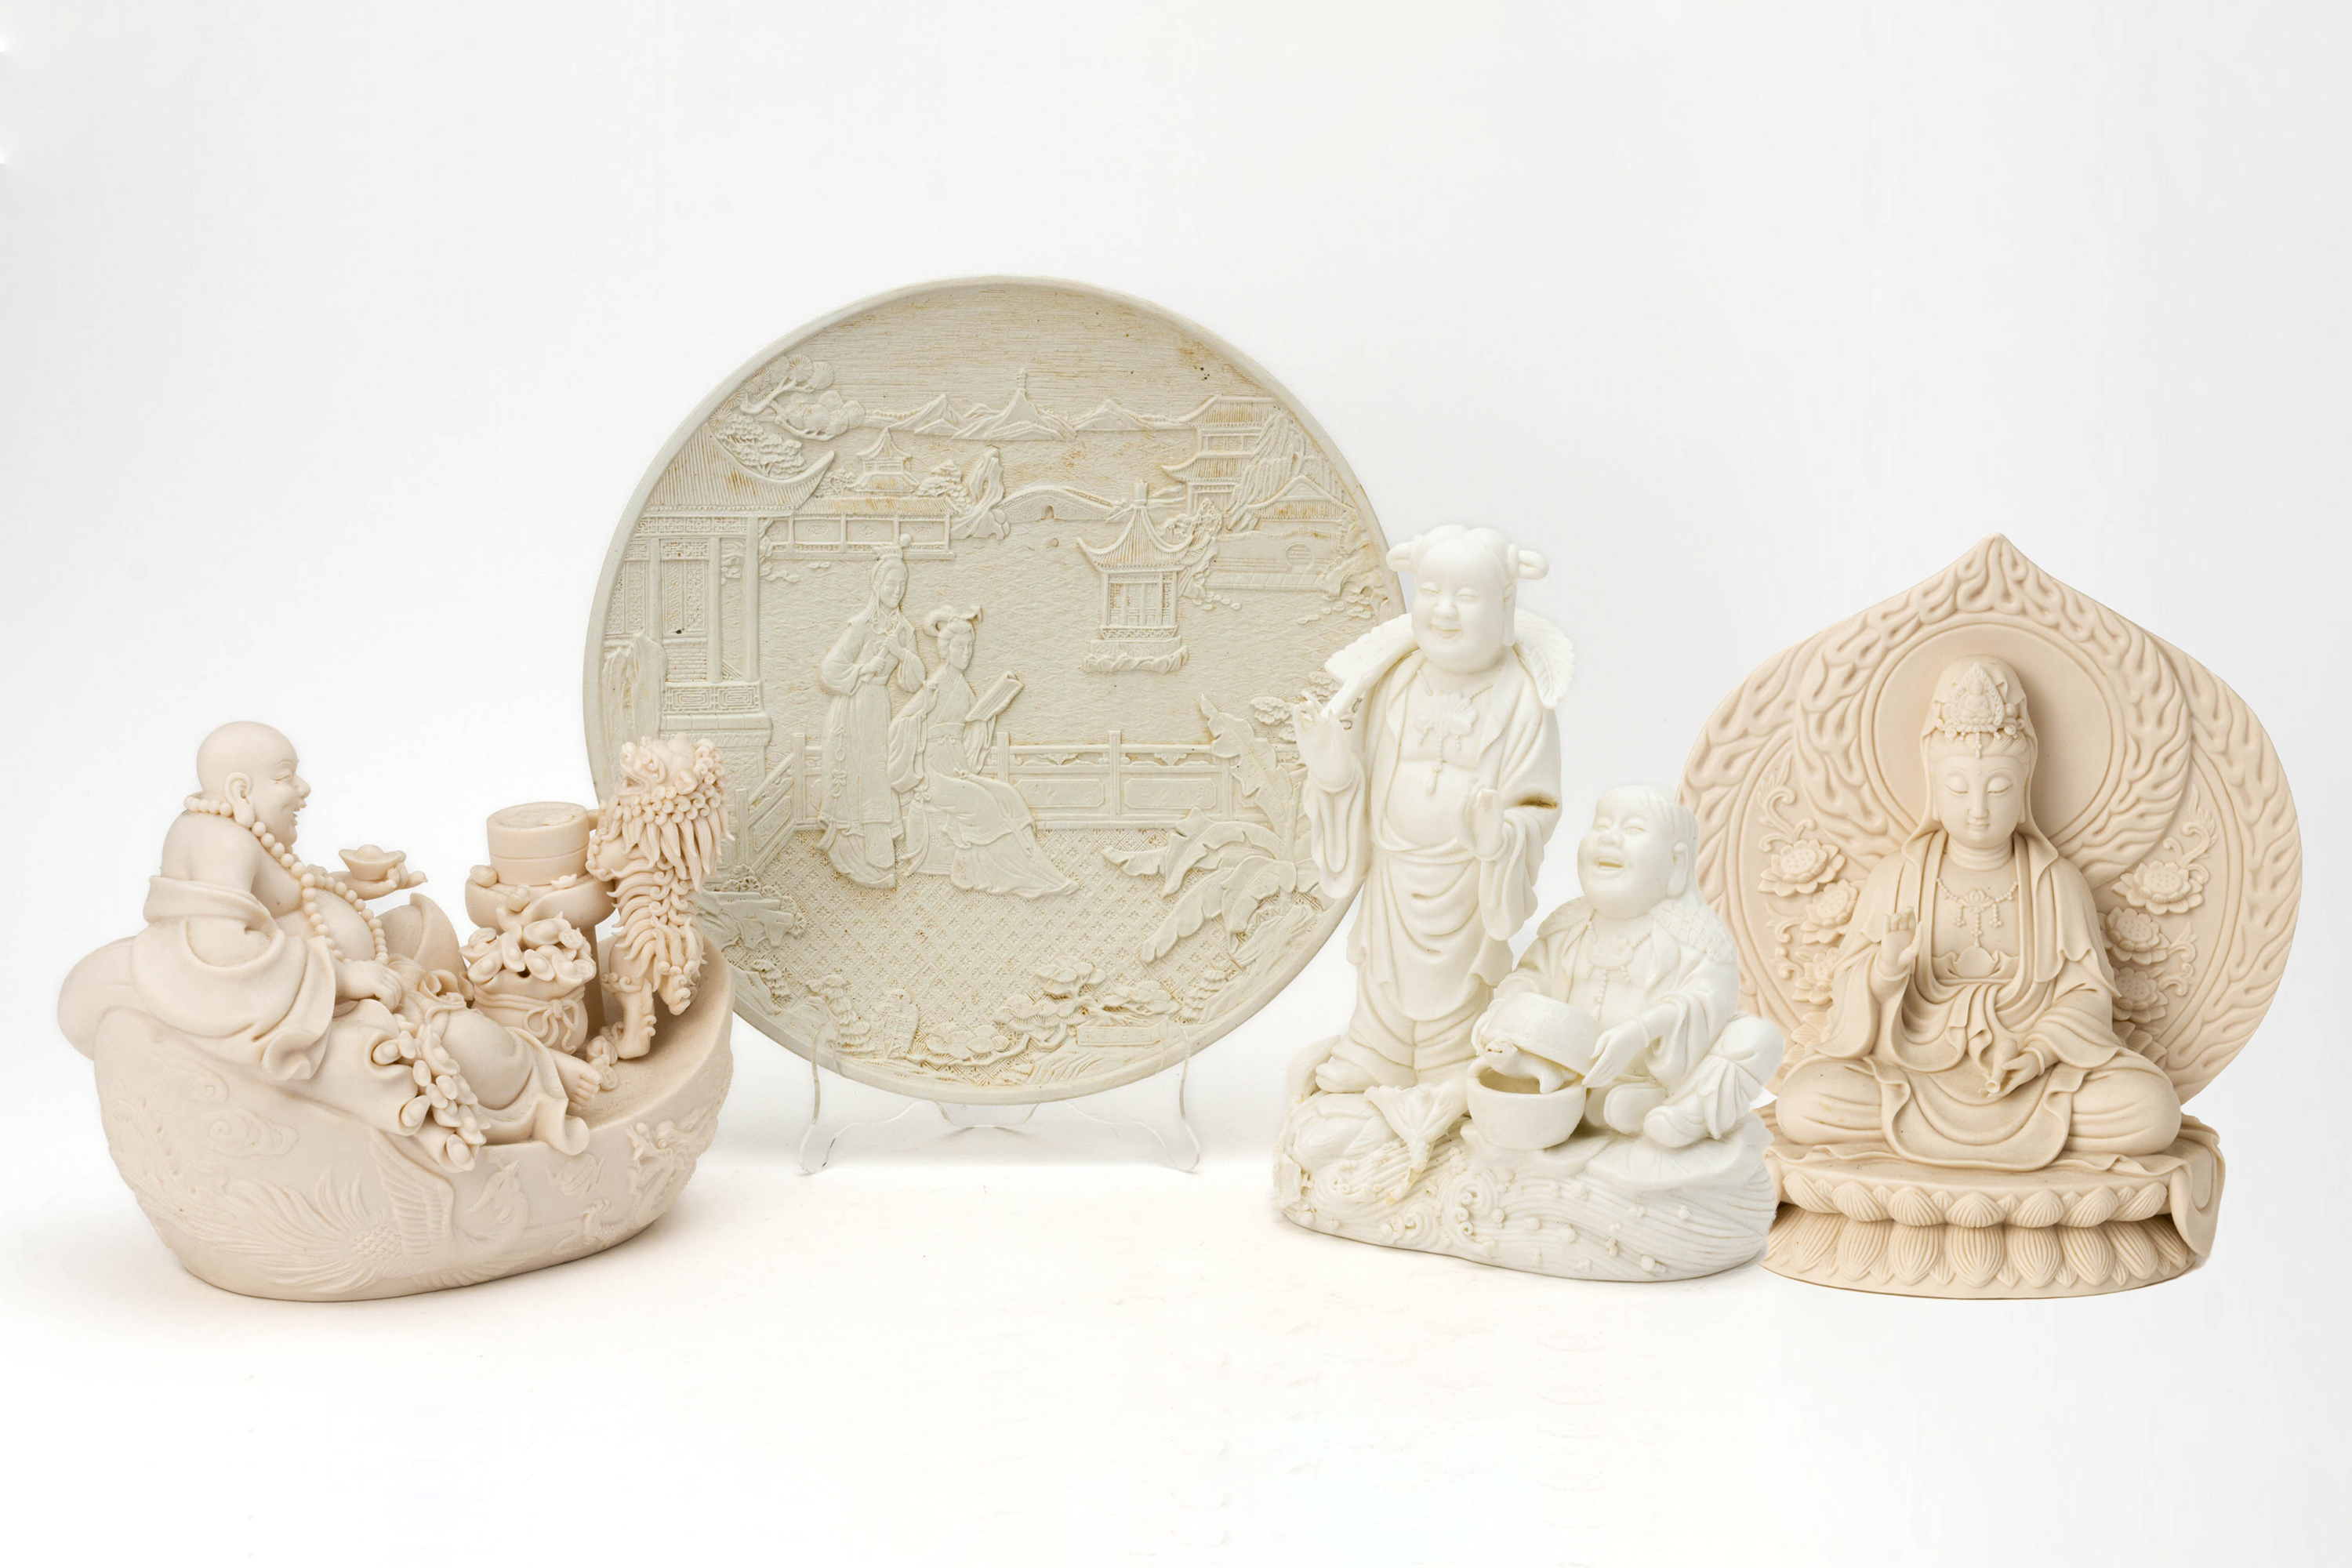 FOUR CHINESE BISCUIT PORCELAIN ITEMS